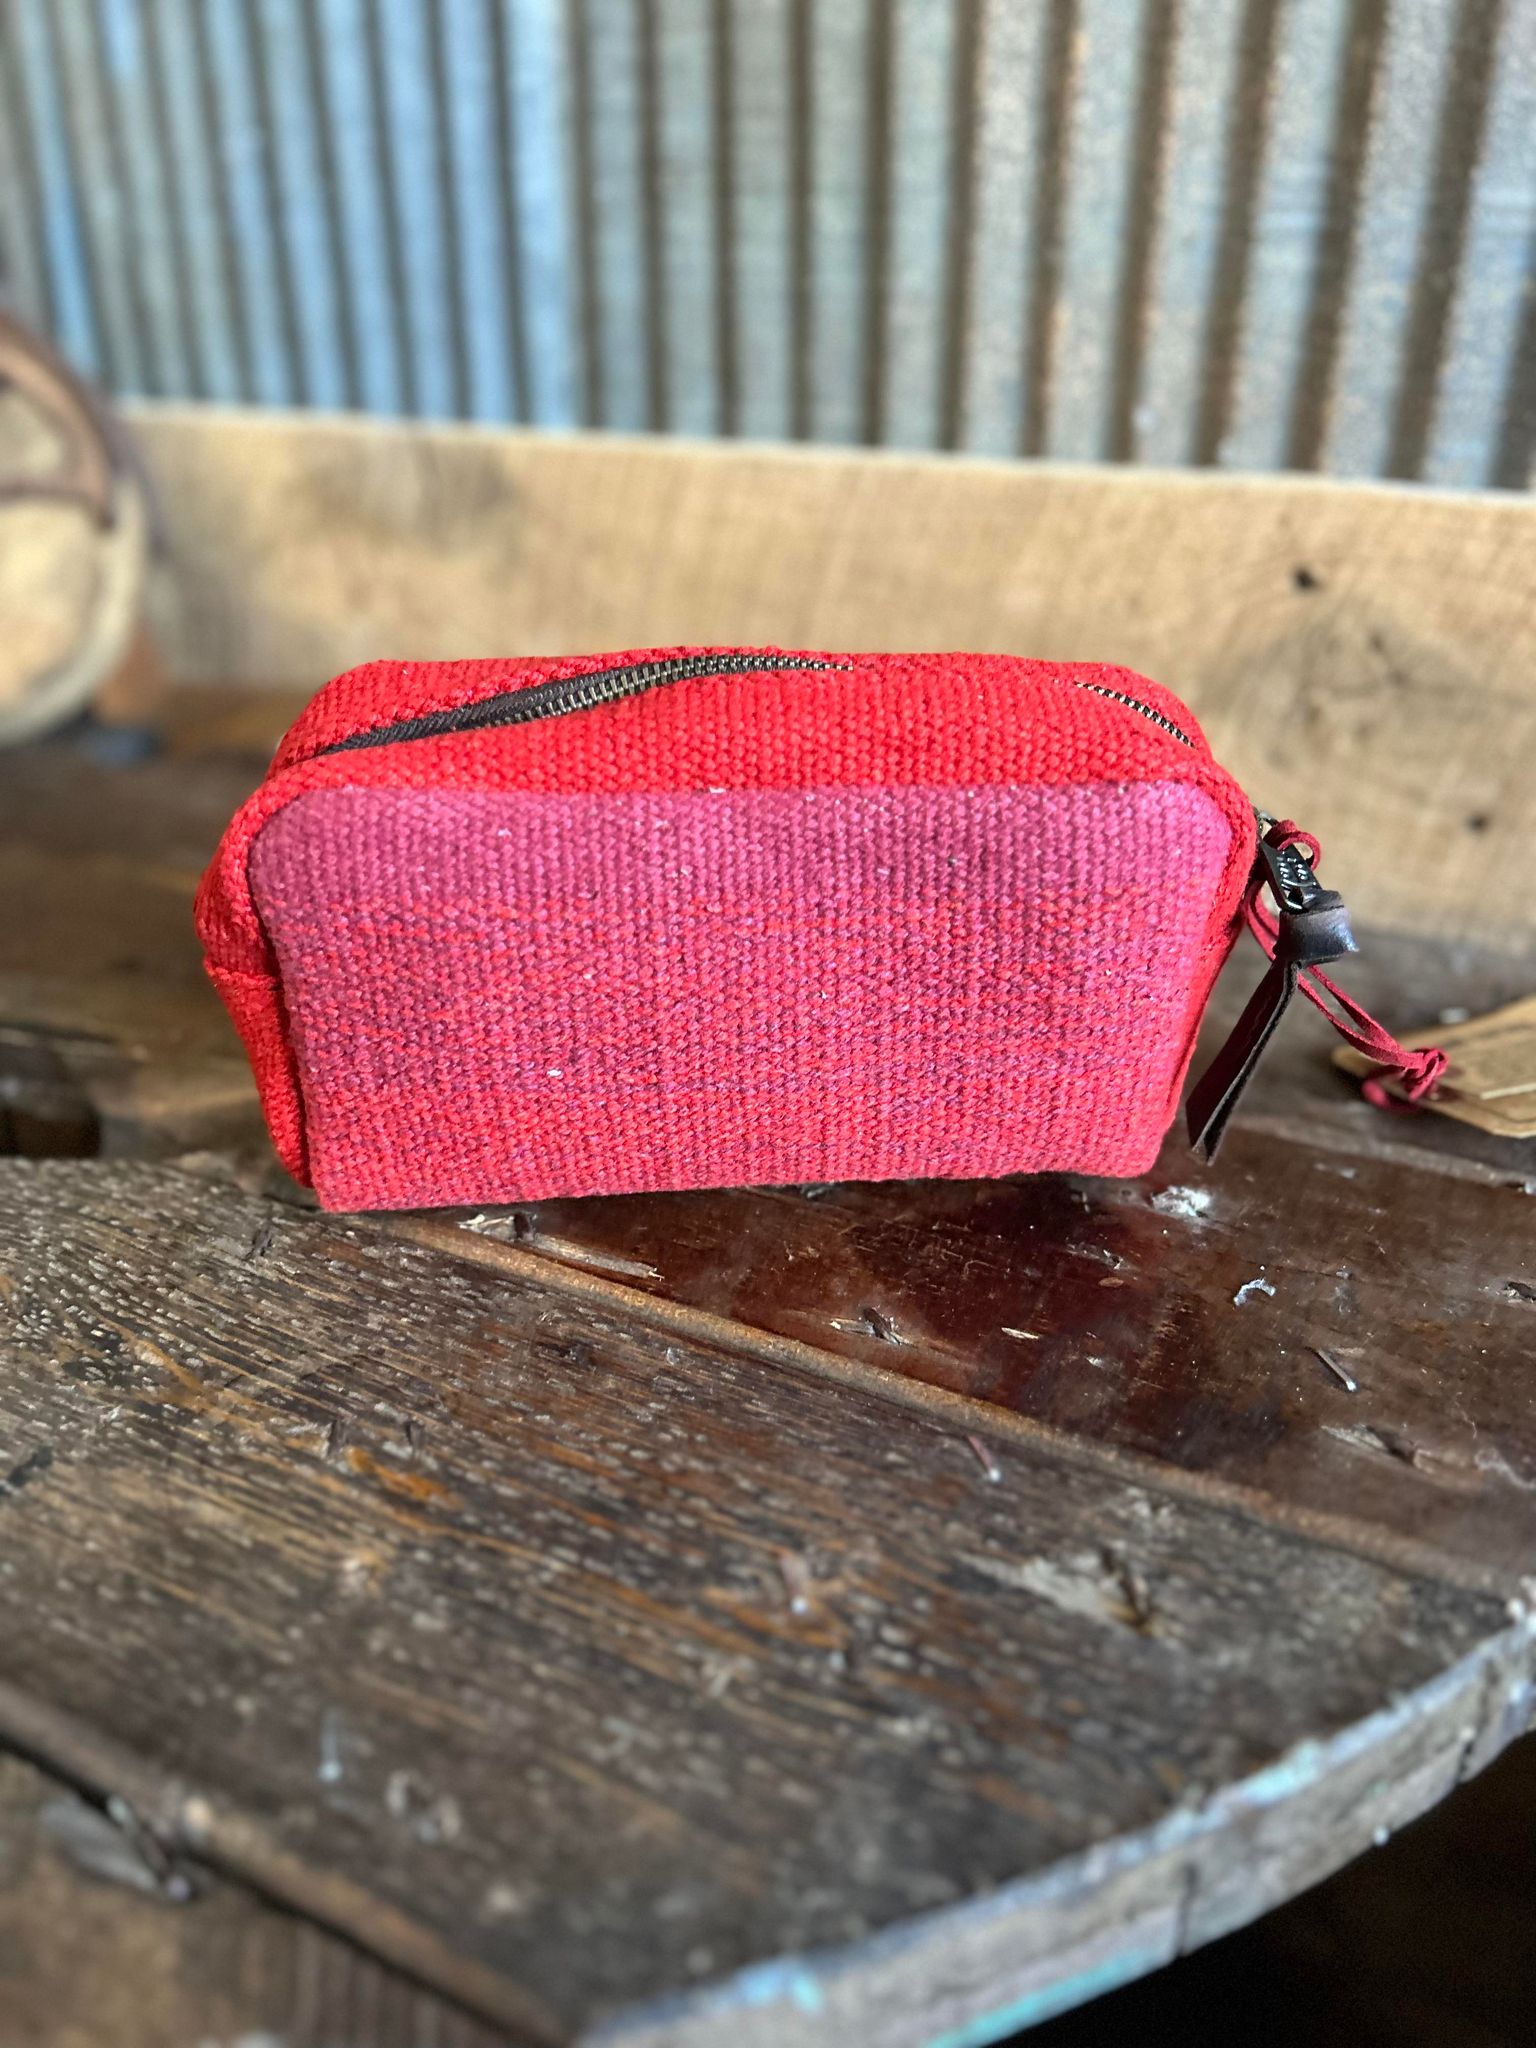 STS Crimson Sun Cosmetic Bag-Cosmetic Bags-Carrol STS Ranchwear-Lucky J Boots & More, Women's, Men's, & Kids Western Store Located in Carthage, MO